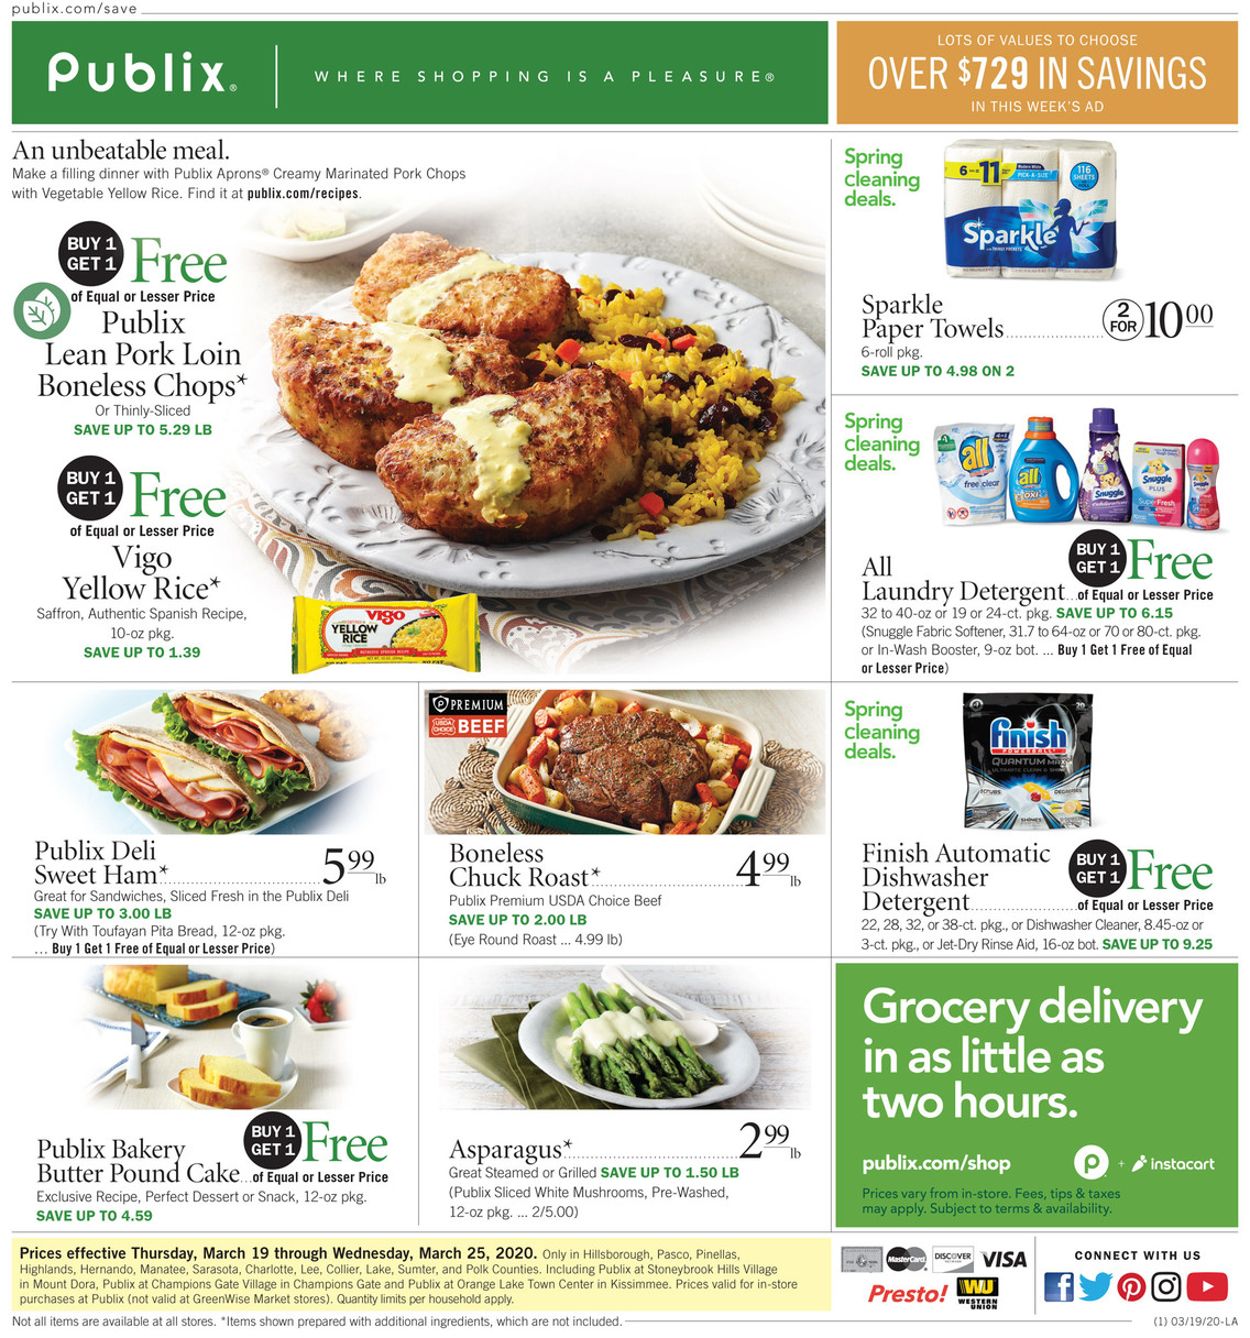 Publix Christmas Meal Where To Order Ready Made Christmas Dinner To